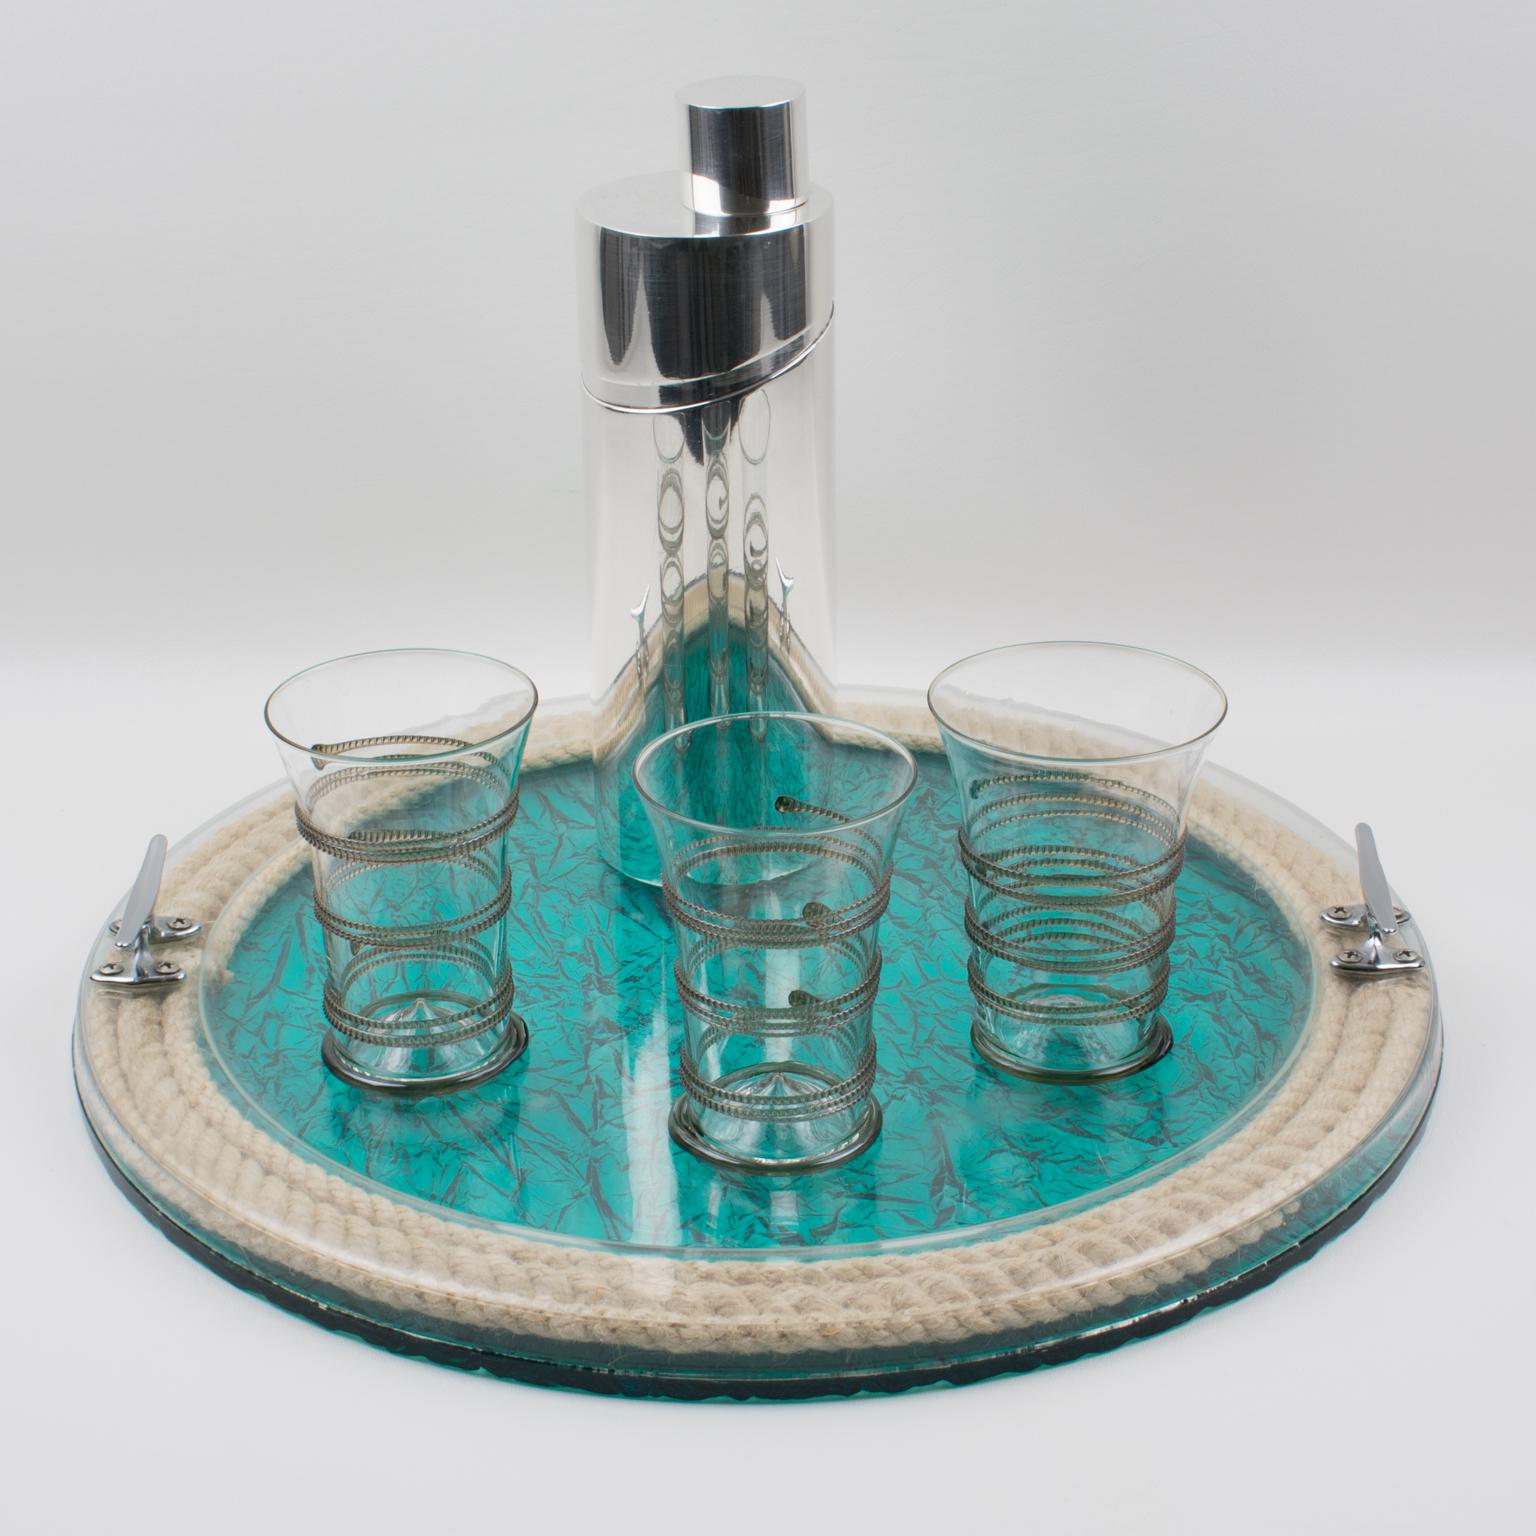 Christian Dior 1970s Lucite and Rope Barware Serving Tray 8